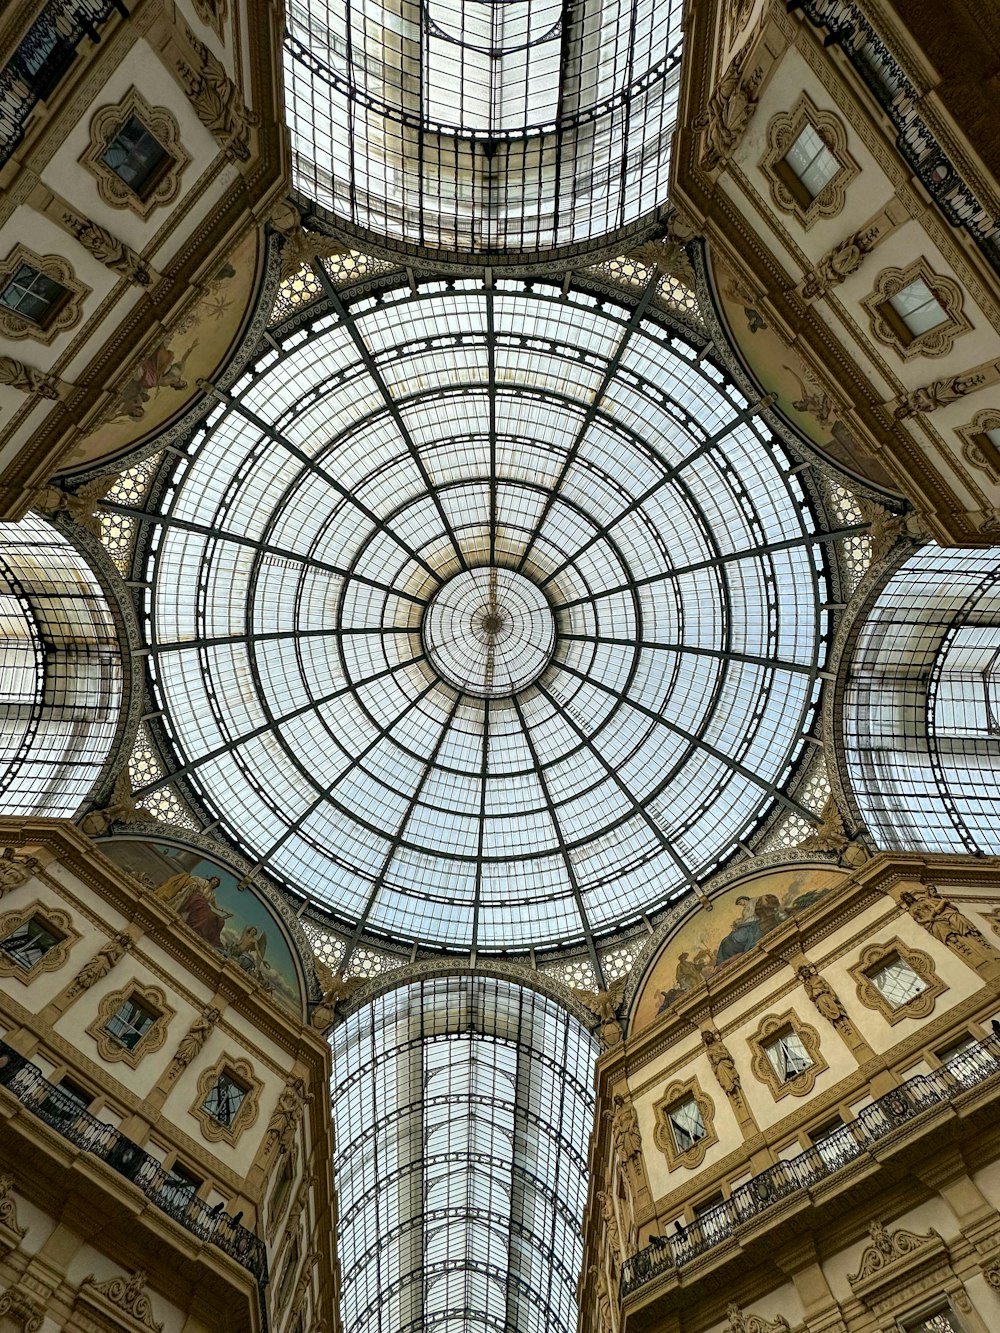 the ceiling of a building with a glass dome